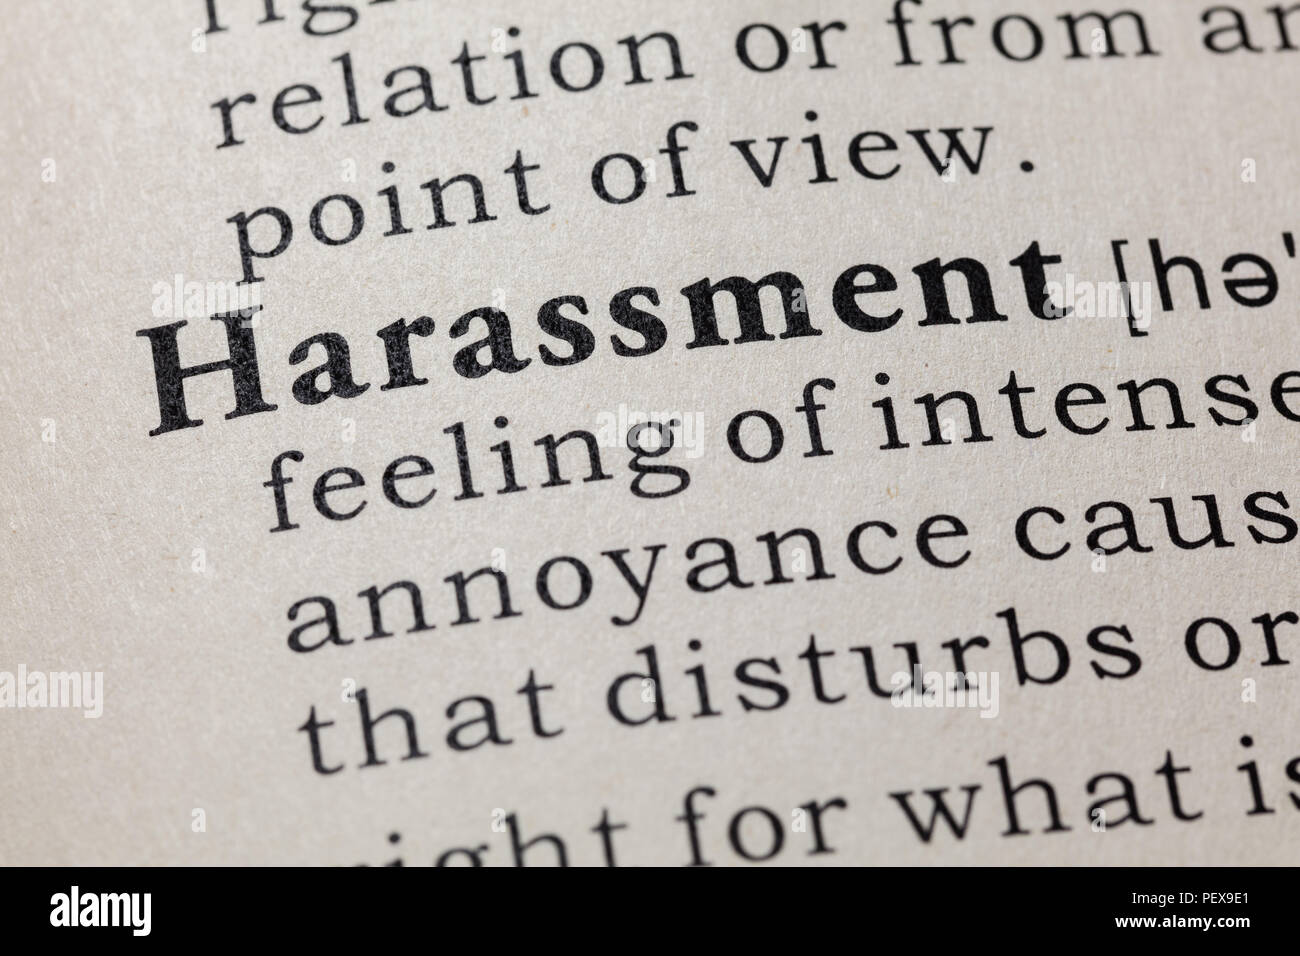 Fake Dictionary, Dictionary definition of the word harassment. including key descriptive words. Stock Photo